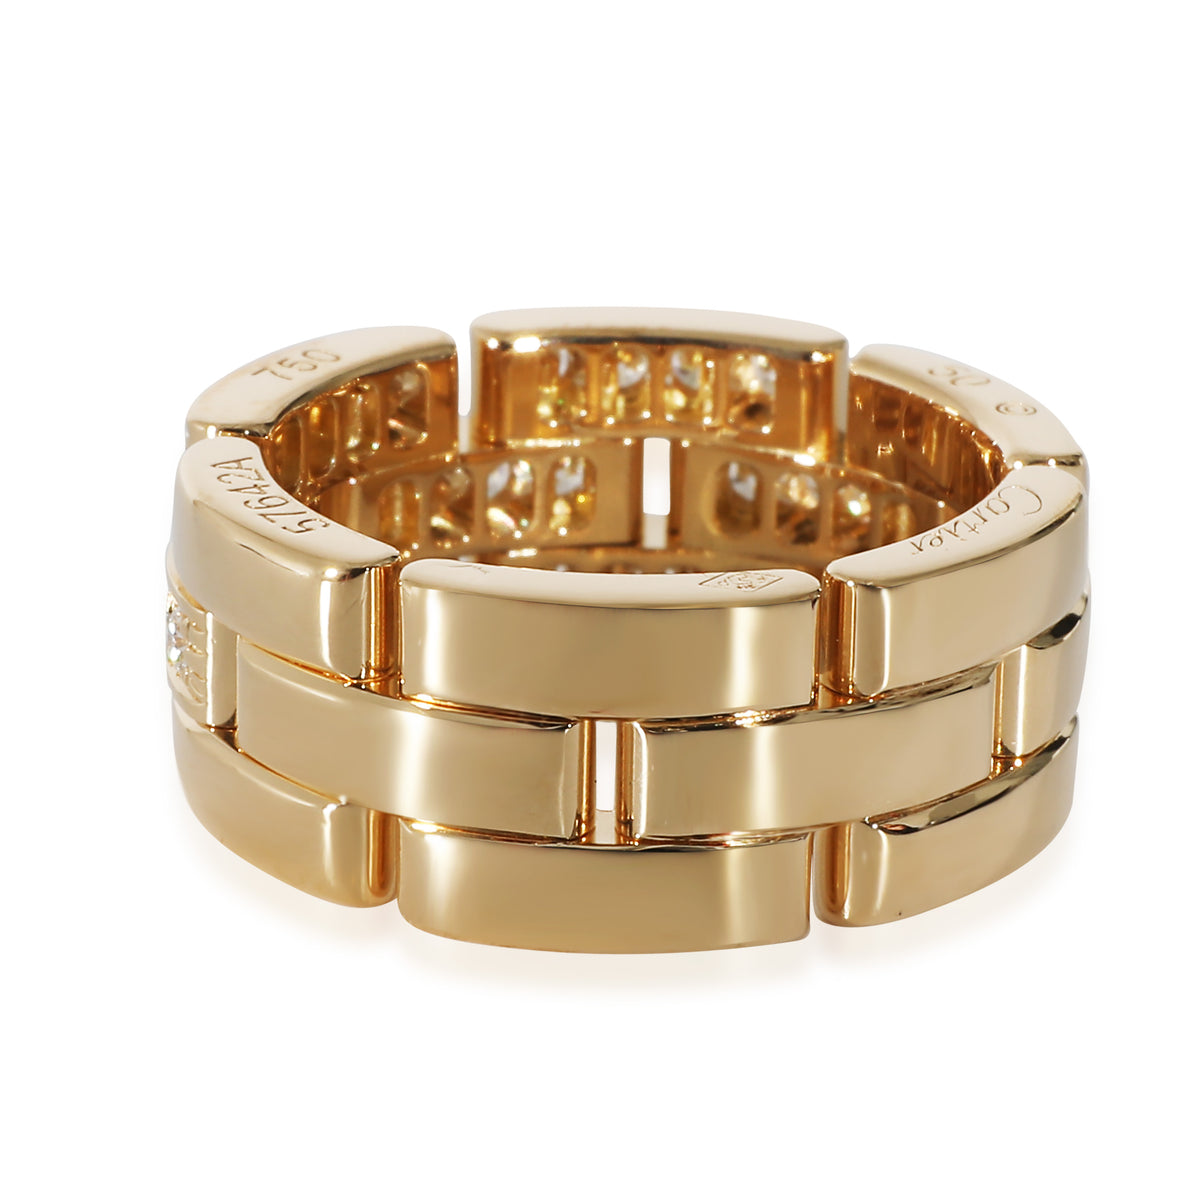 Maillon Panthere Band in 18k Yellow Gold 0.53 CTW